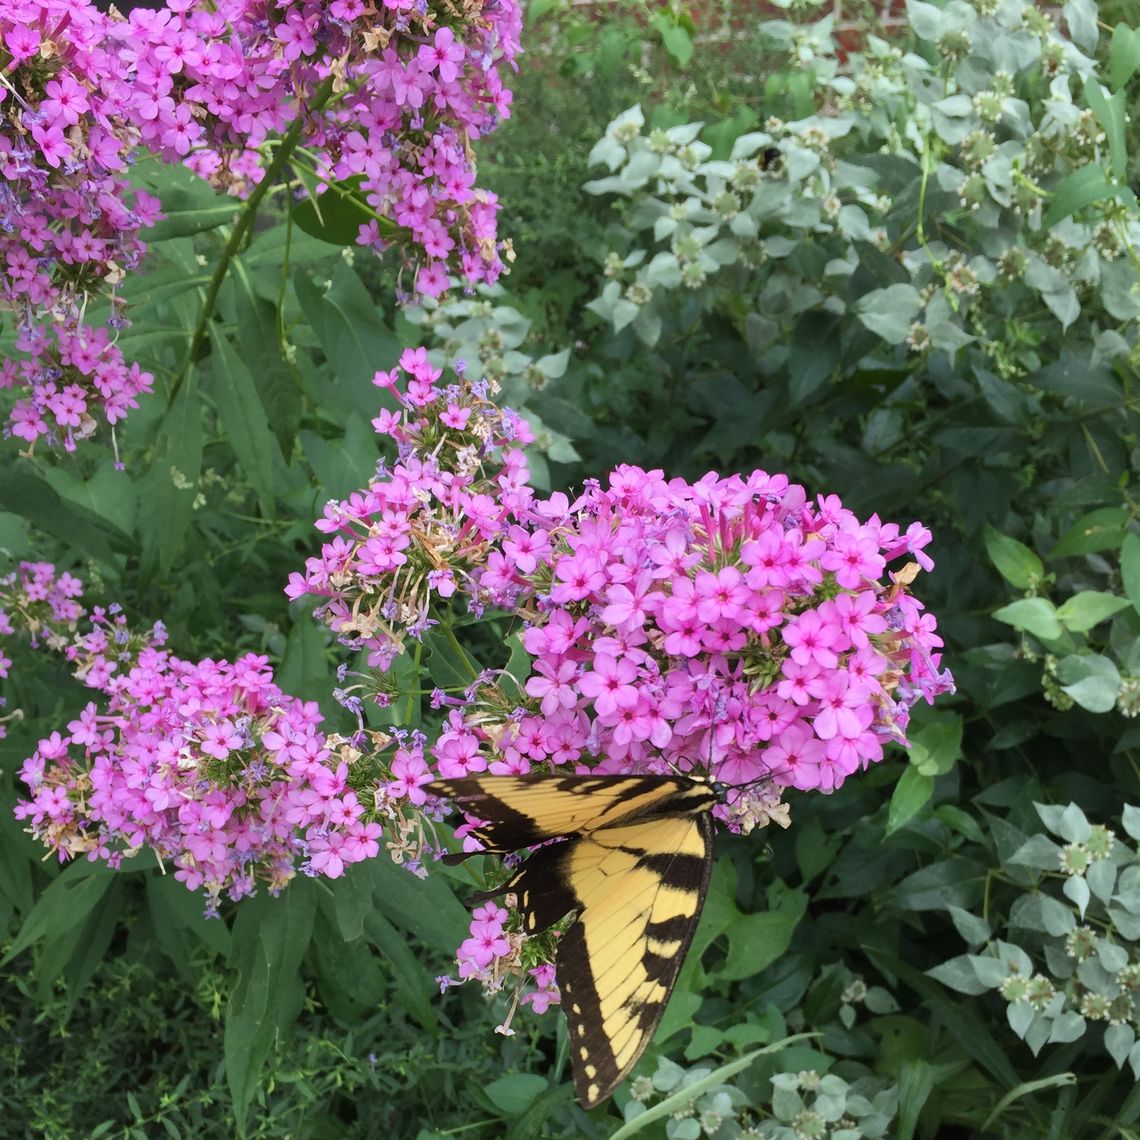 A tiger stripe swallow tail perched on some garden phlox in the native pollinator garden beside brooks